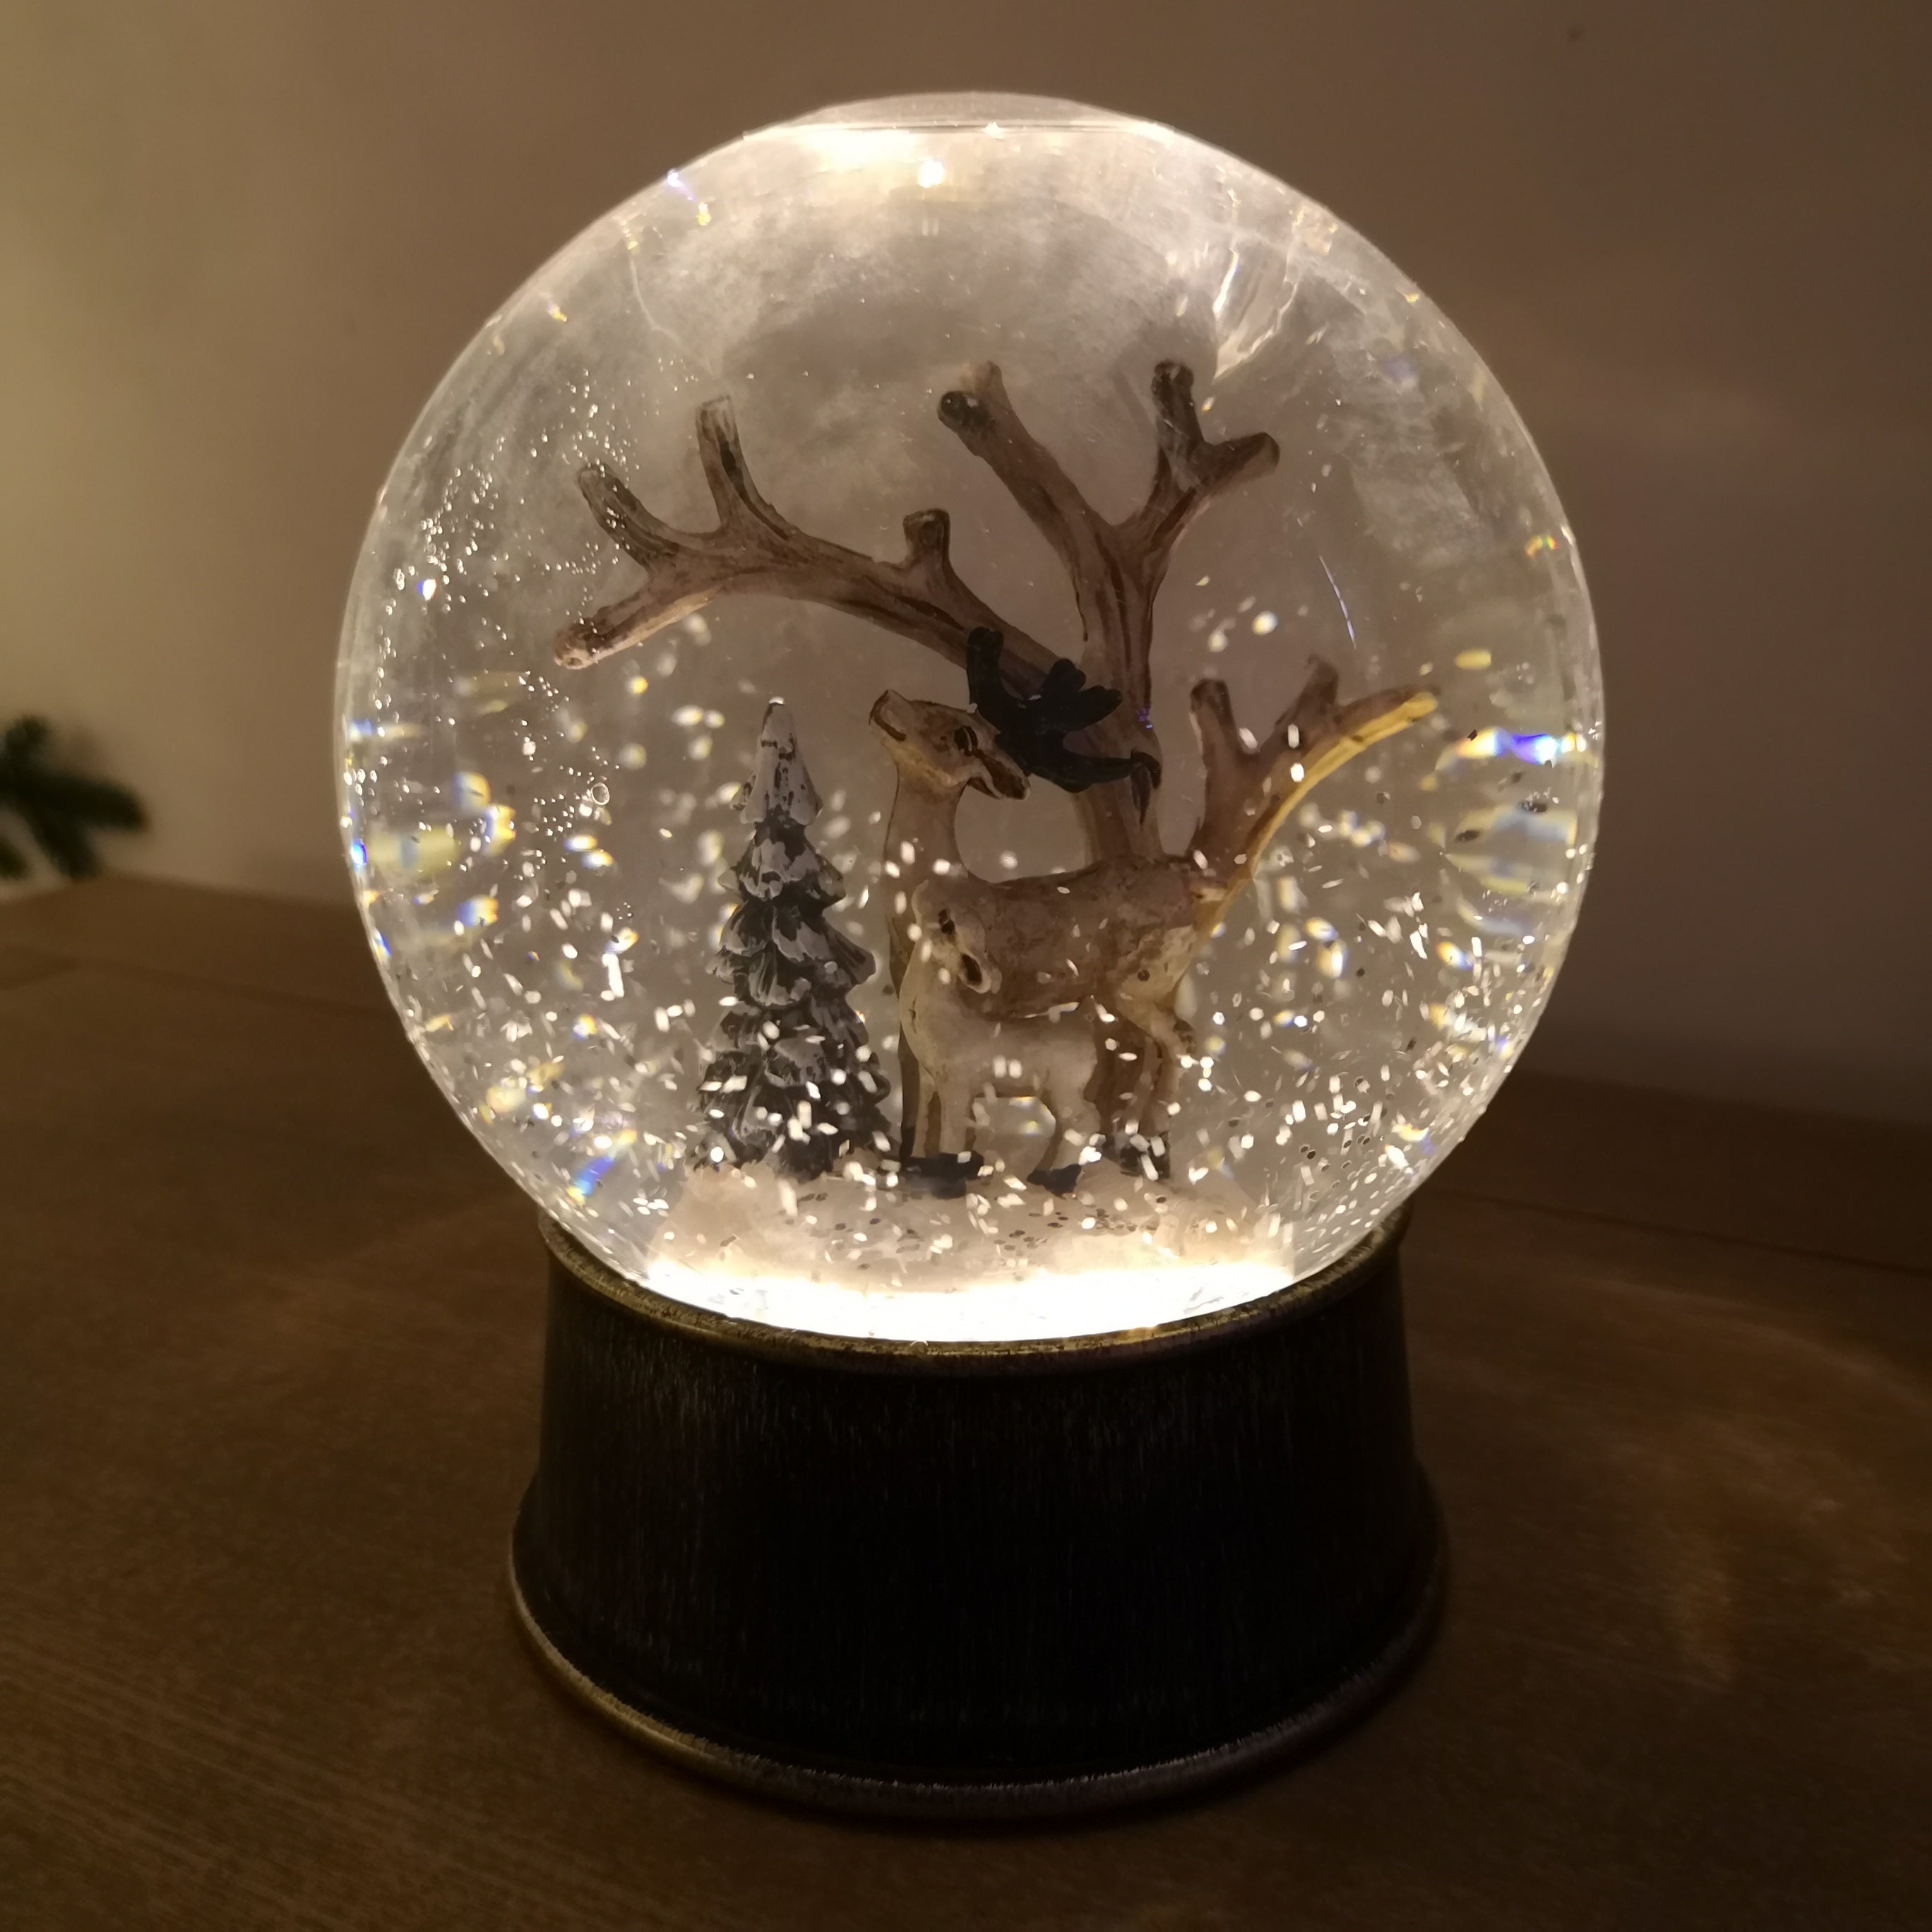 18cm Snowtime Dual Powered Christmas Water Spinner Snow Globe with Reindeer Scene